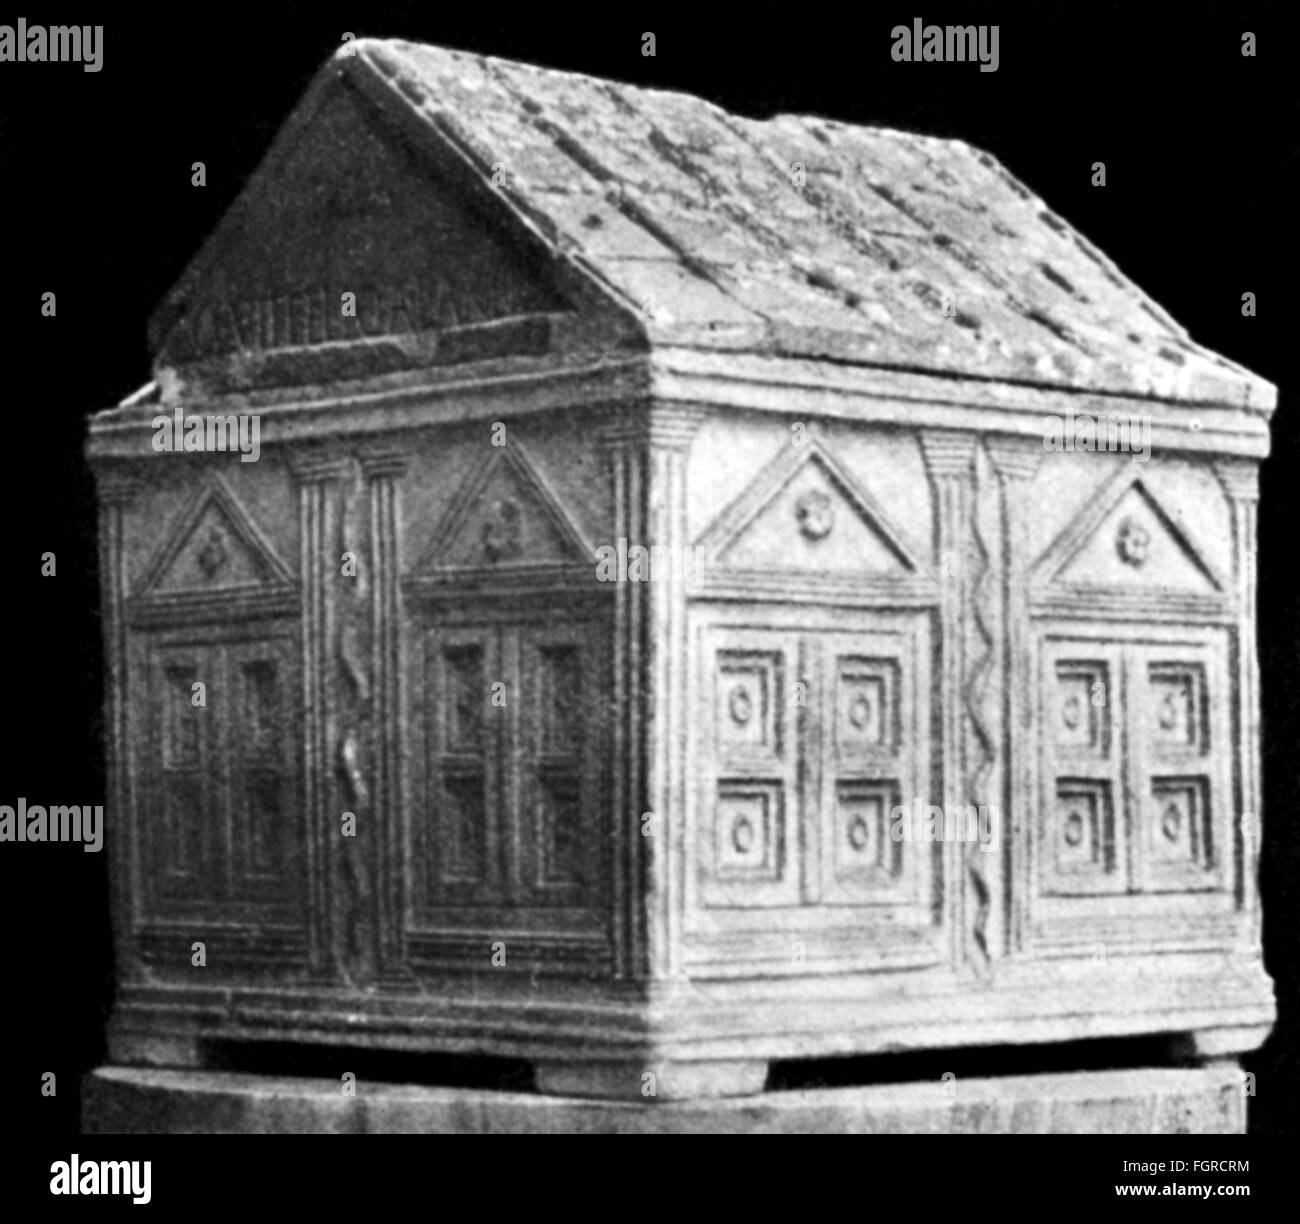 death, coffins, ancient Roman urn in shape of a house, Vatican, Rome, Roman Empire, Rome, burial, burials, burning up, ash, ashes, ornament, ornaments, funeral, funerals, interment, interments, entombment, demise, death, dying, die, decease, deceasing, close of life, cremation, coffin, casket, coffins, caskets, ancient world, ancient times, urn, urns, historic, historical, ancient world, Additional-Rights-Clearences-Not Available Stock Photo